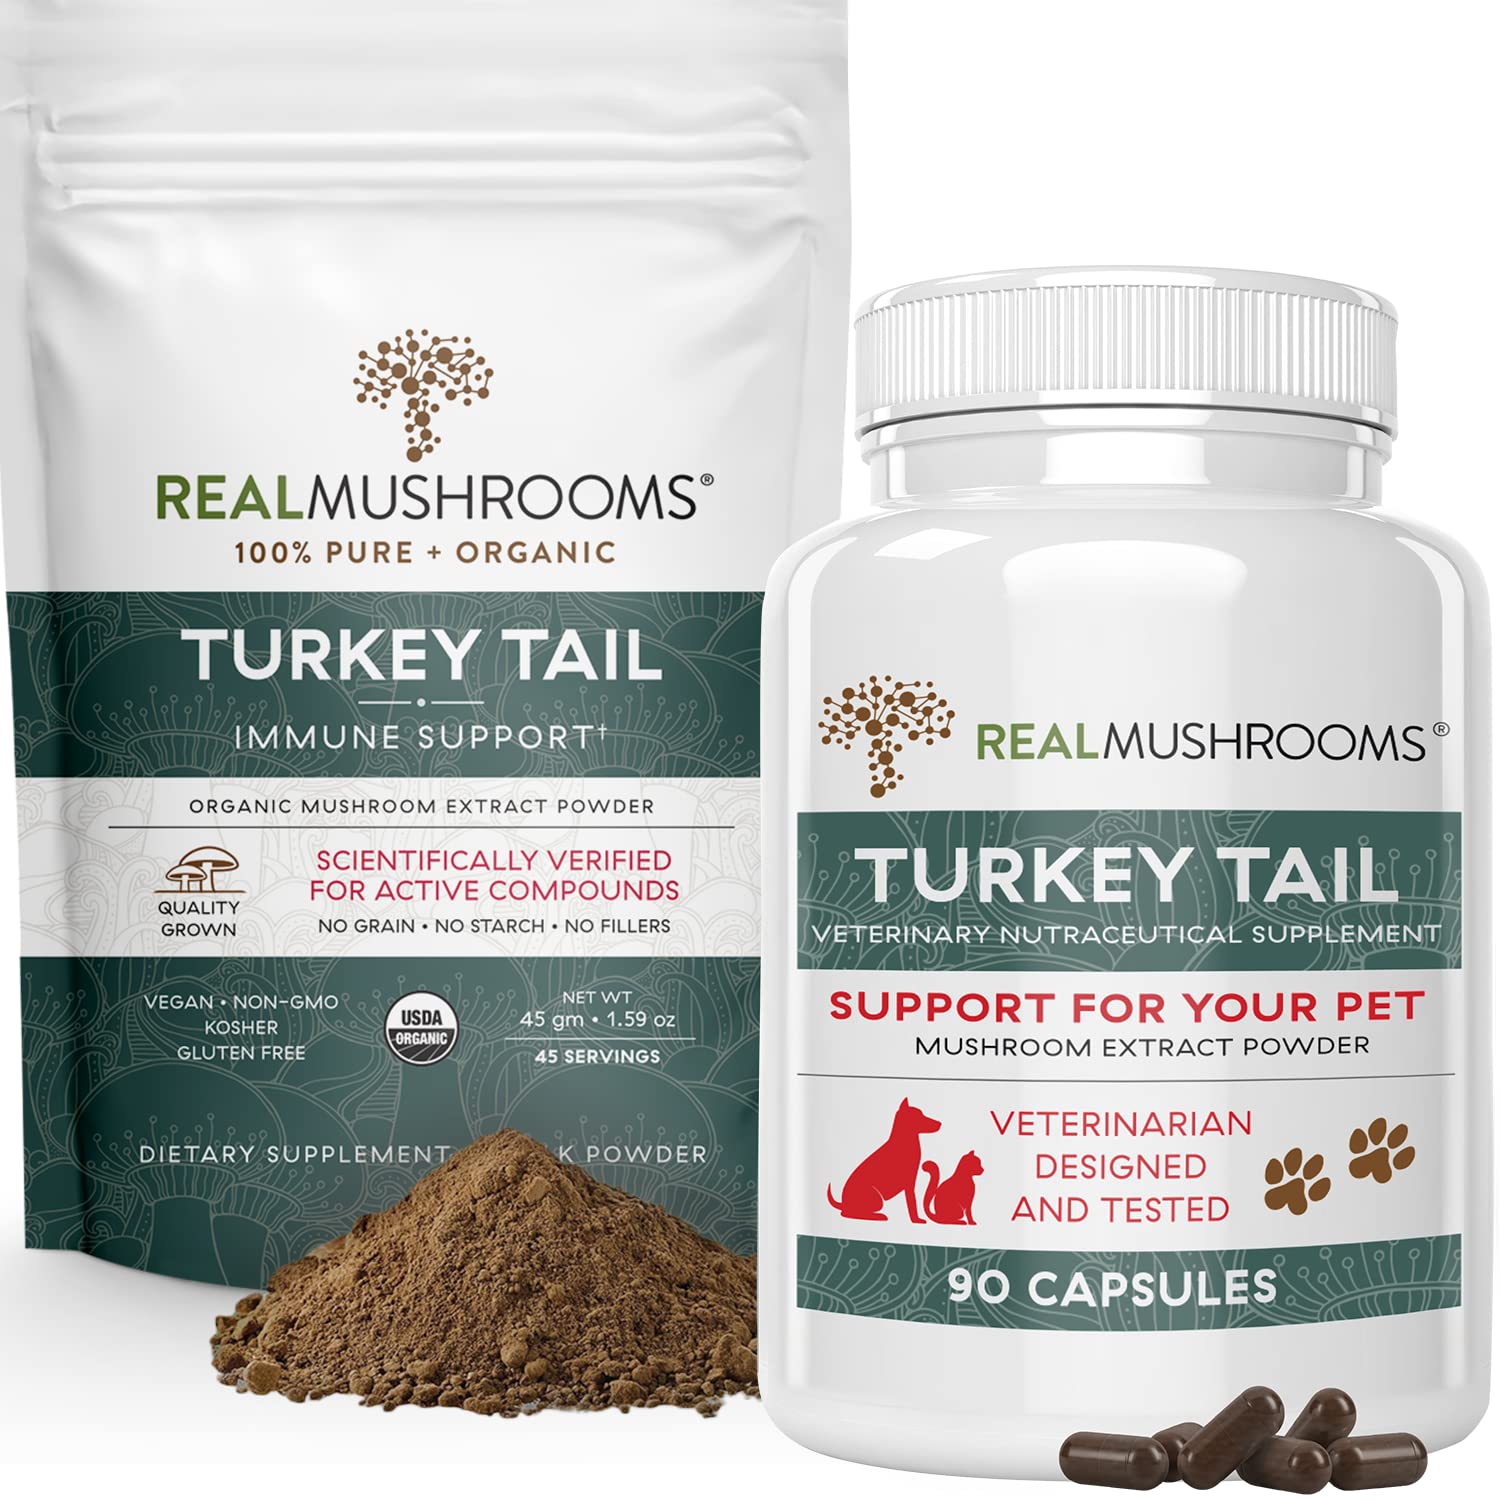 Real Mushrooms Turkey Tail Powder for Humans (45 Servings) & Turkey Tail for Pets (90ct) - Powder & Capsules Bundle for Immune Support - Vegan, Non-GMO, Grain-Free, Gluten-Free